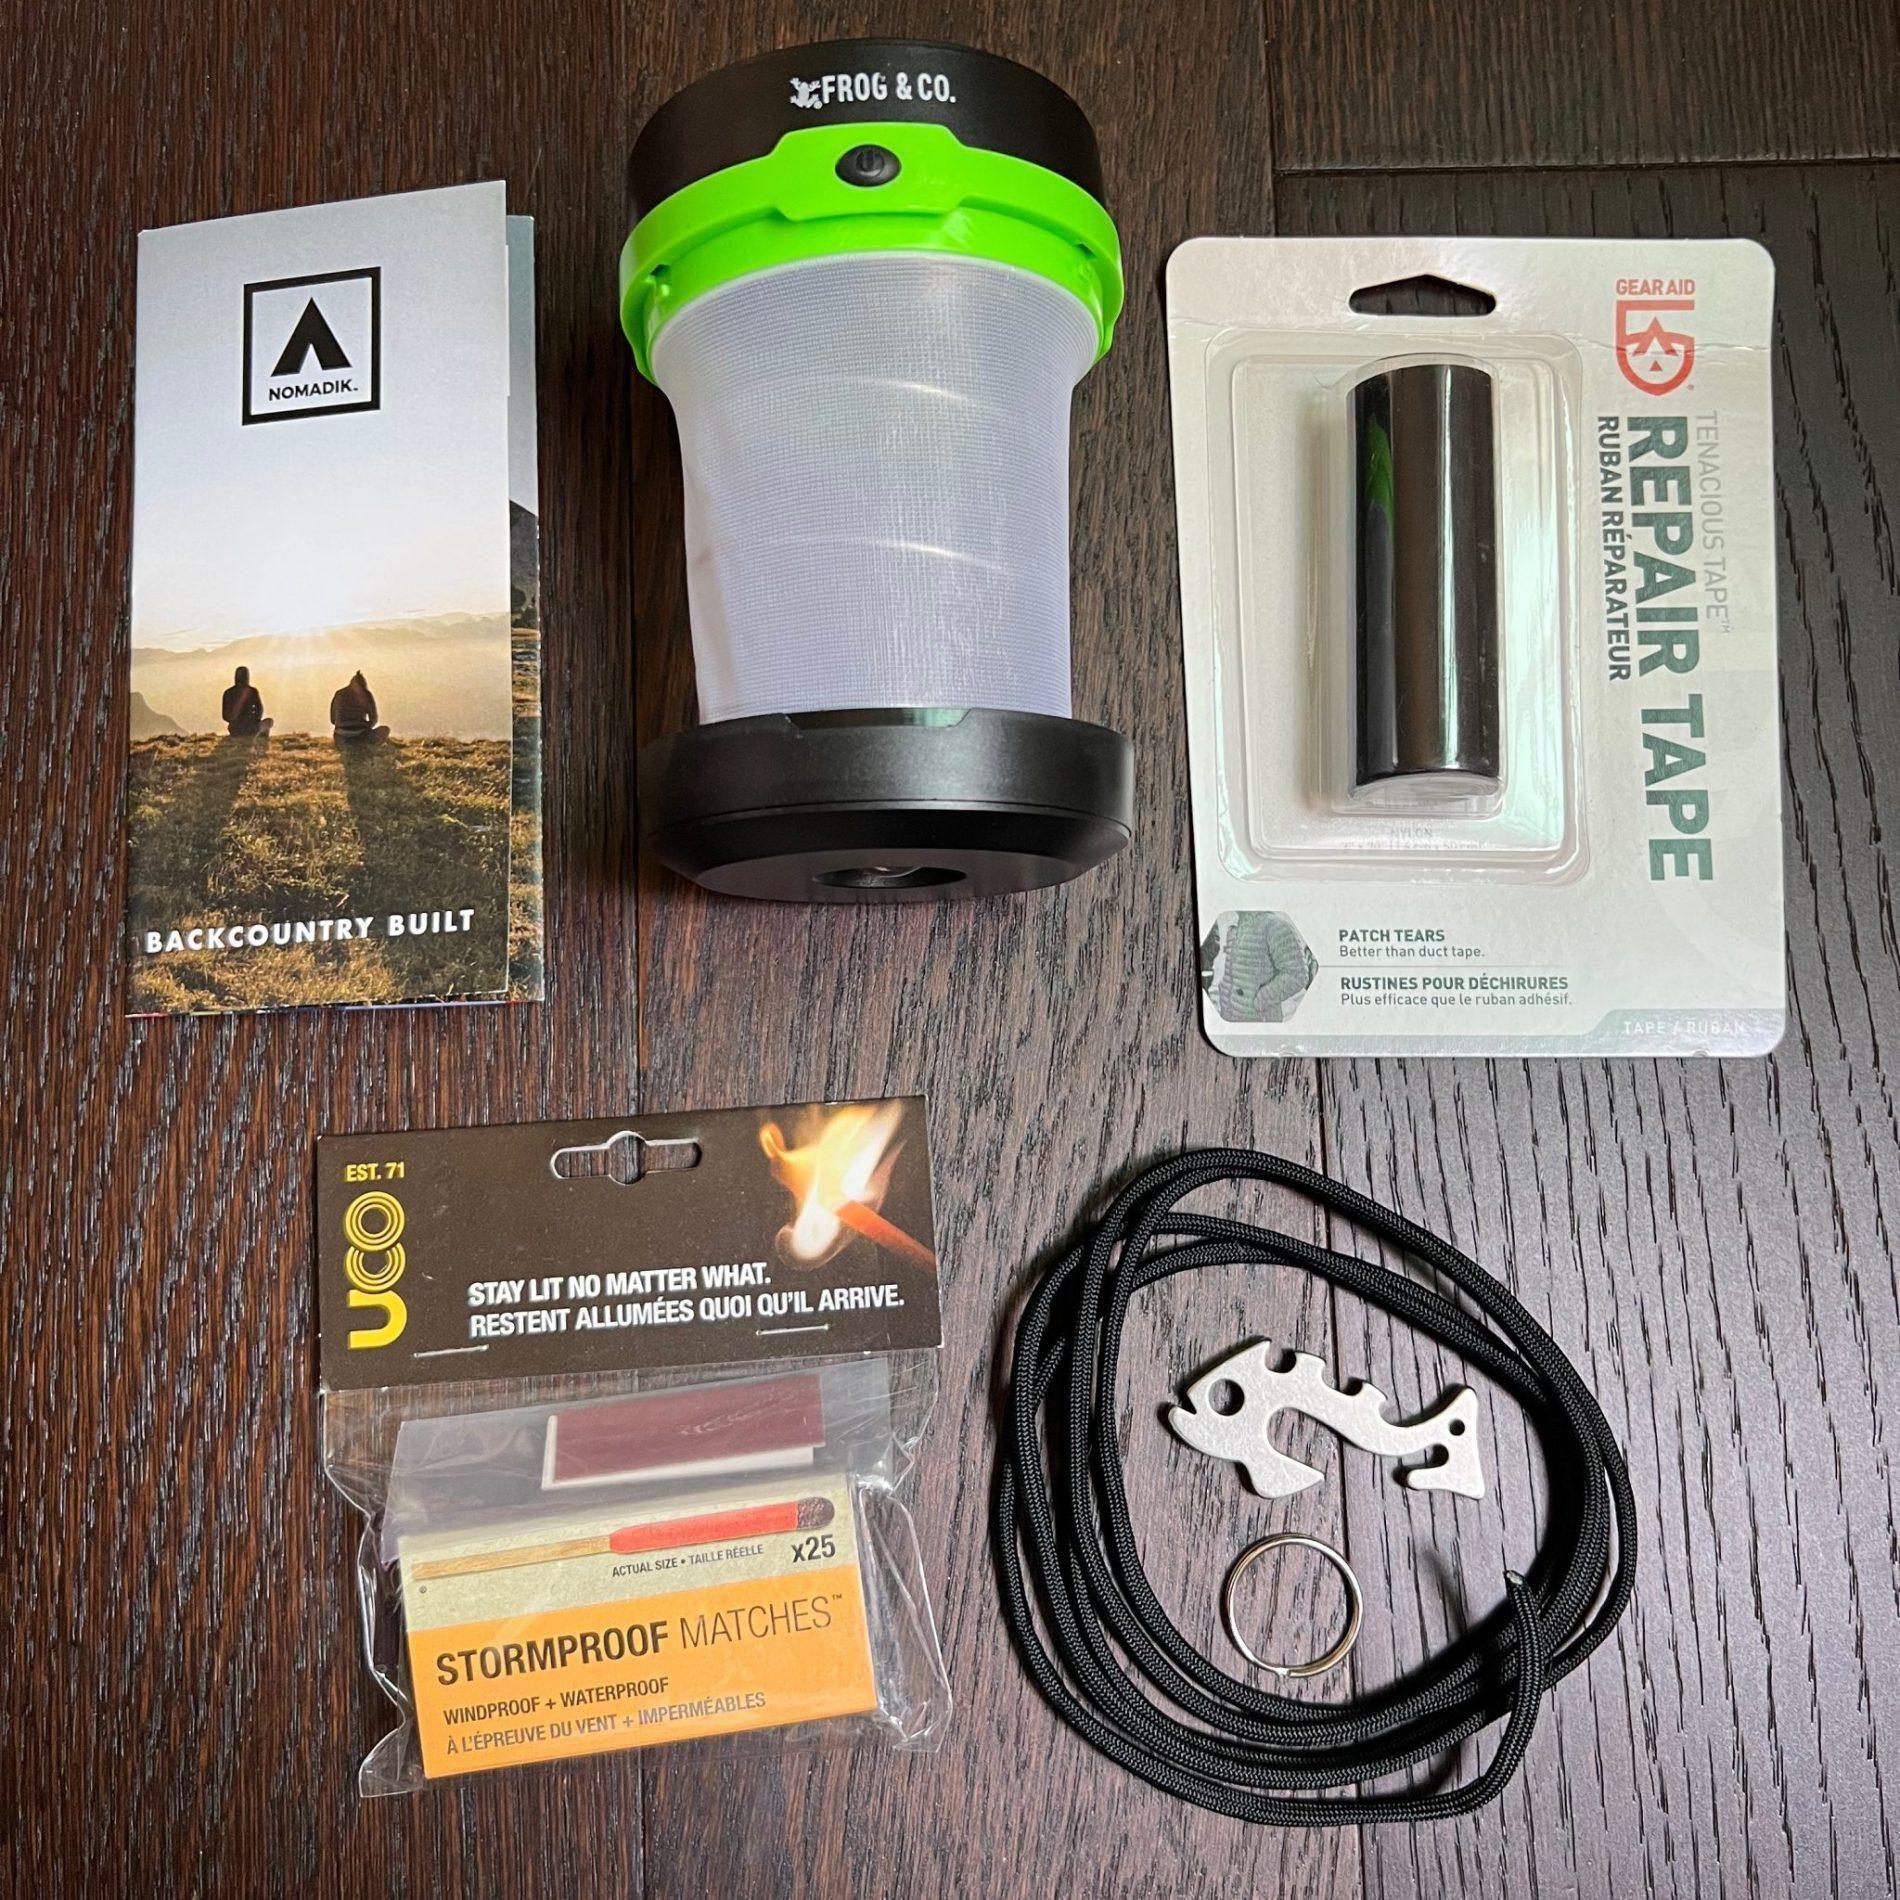 Read more about the article Nomadik Review + Coupon Code – Backcountry Built